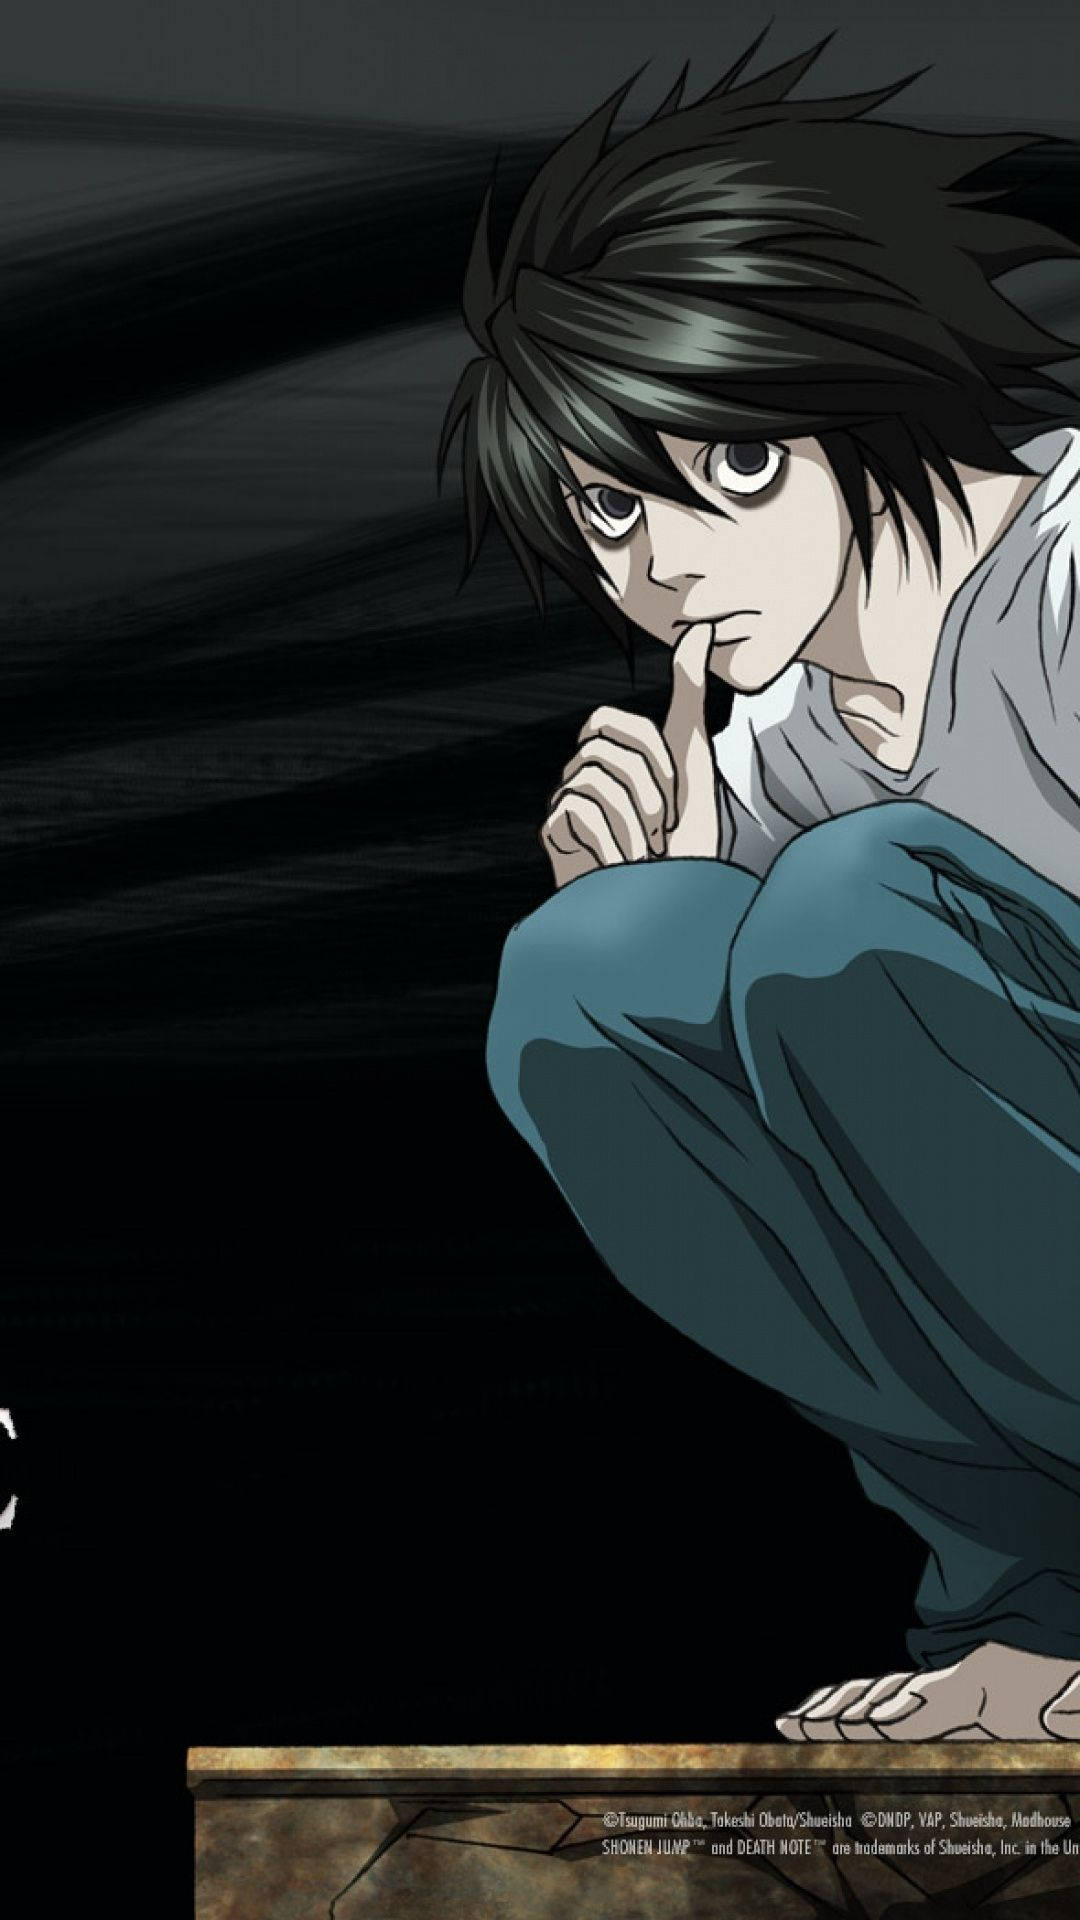 Lawliet Crouched On Platform Death Note iPhone Wallpaper